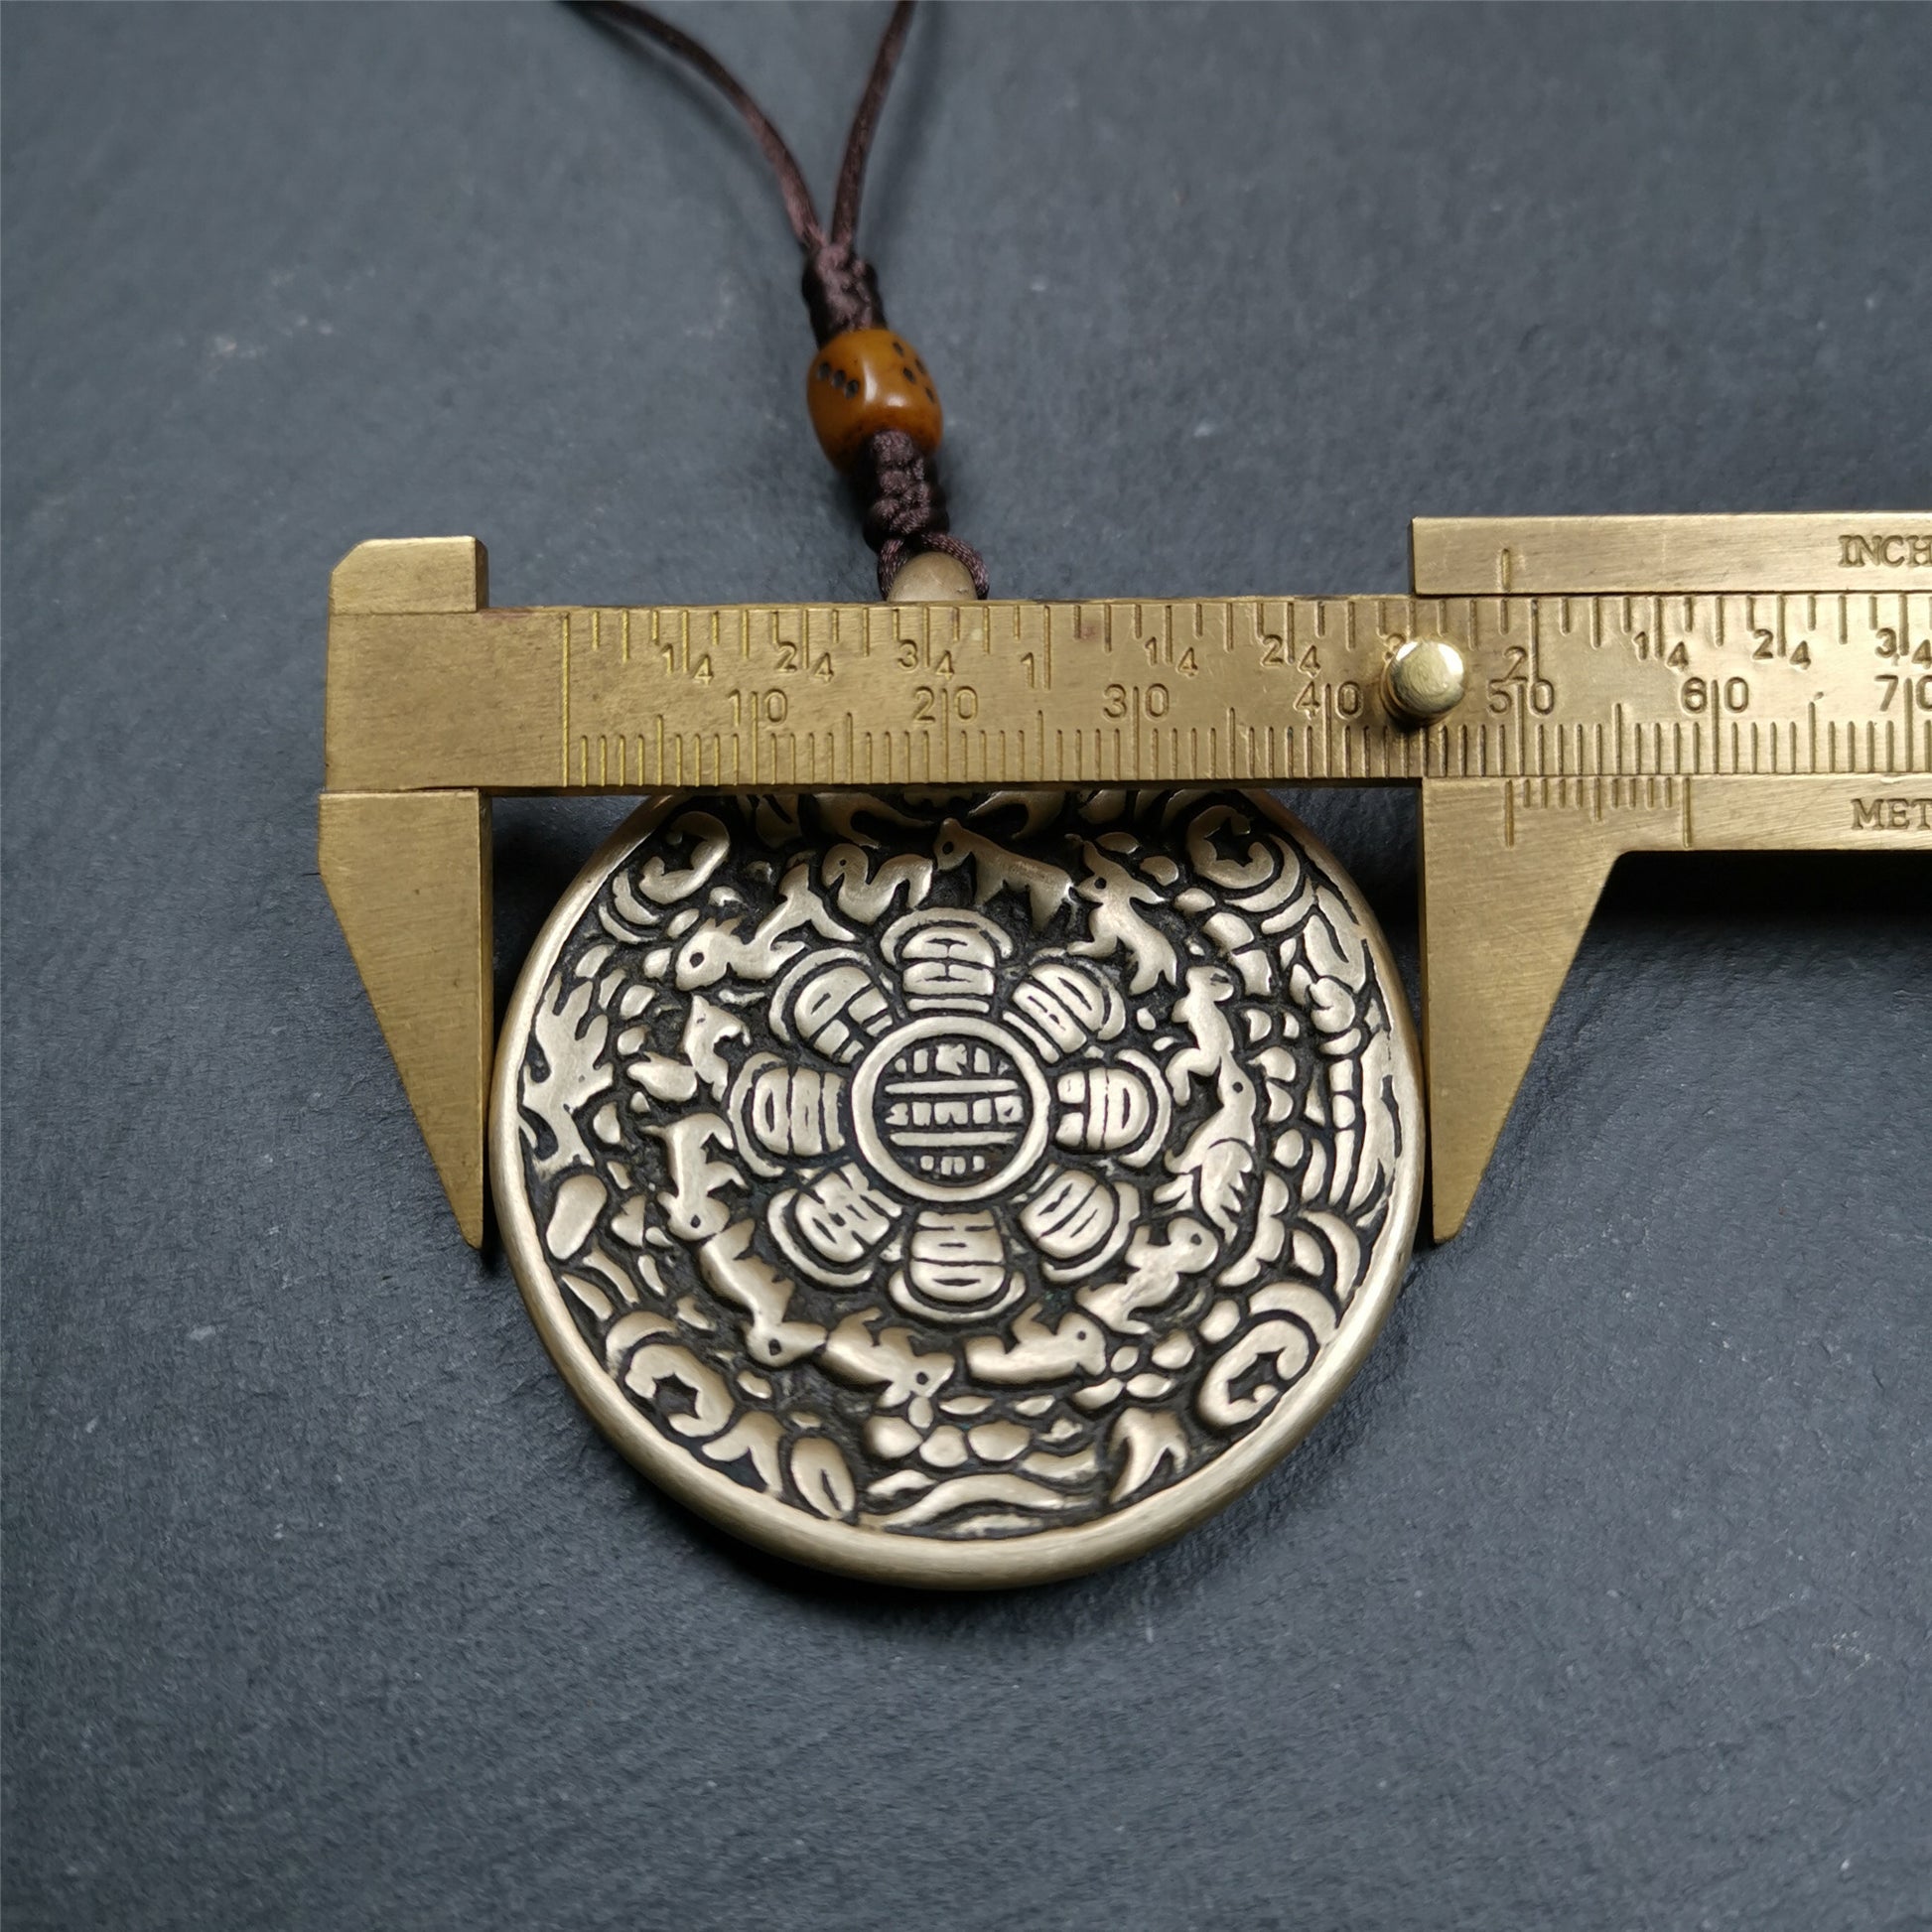 This unique tibetan melong badge was collected from Baiyu Monastery for 30 years. It's a Astrology Protective Amulet Pendant,made of cold iron. The pattern is Tibetan Budhist Protective Amulet Pendant - SIPAHO(srid pa ho).